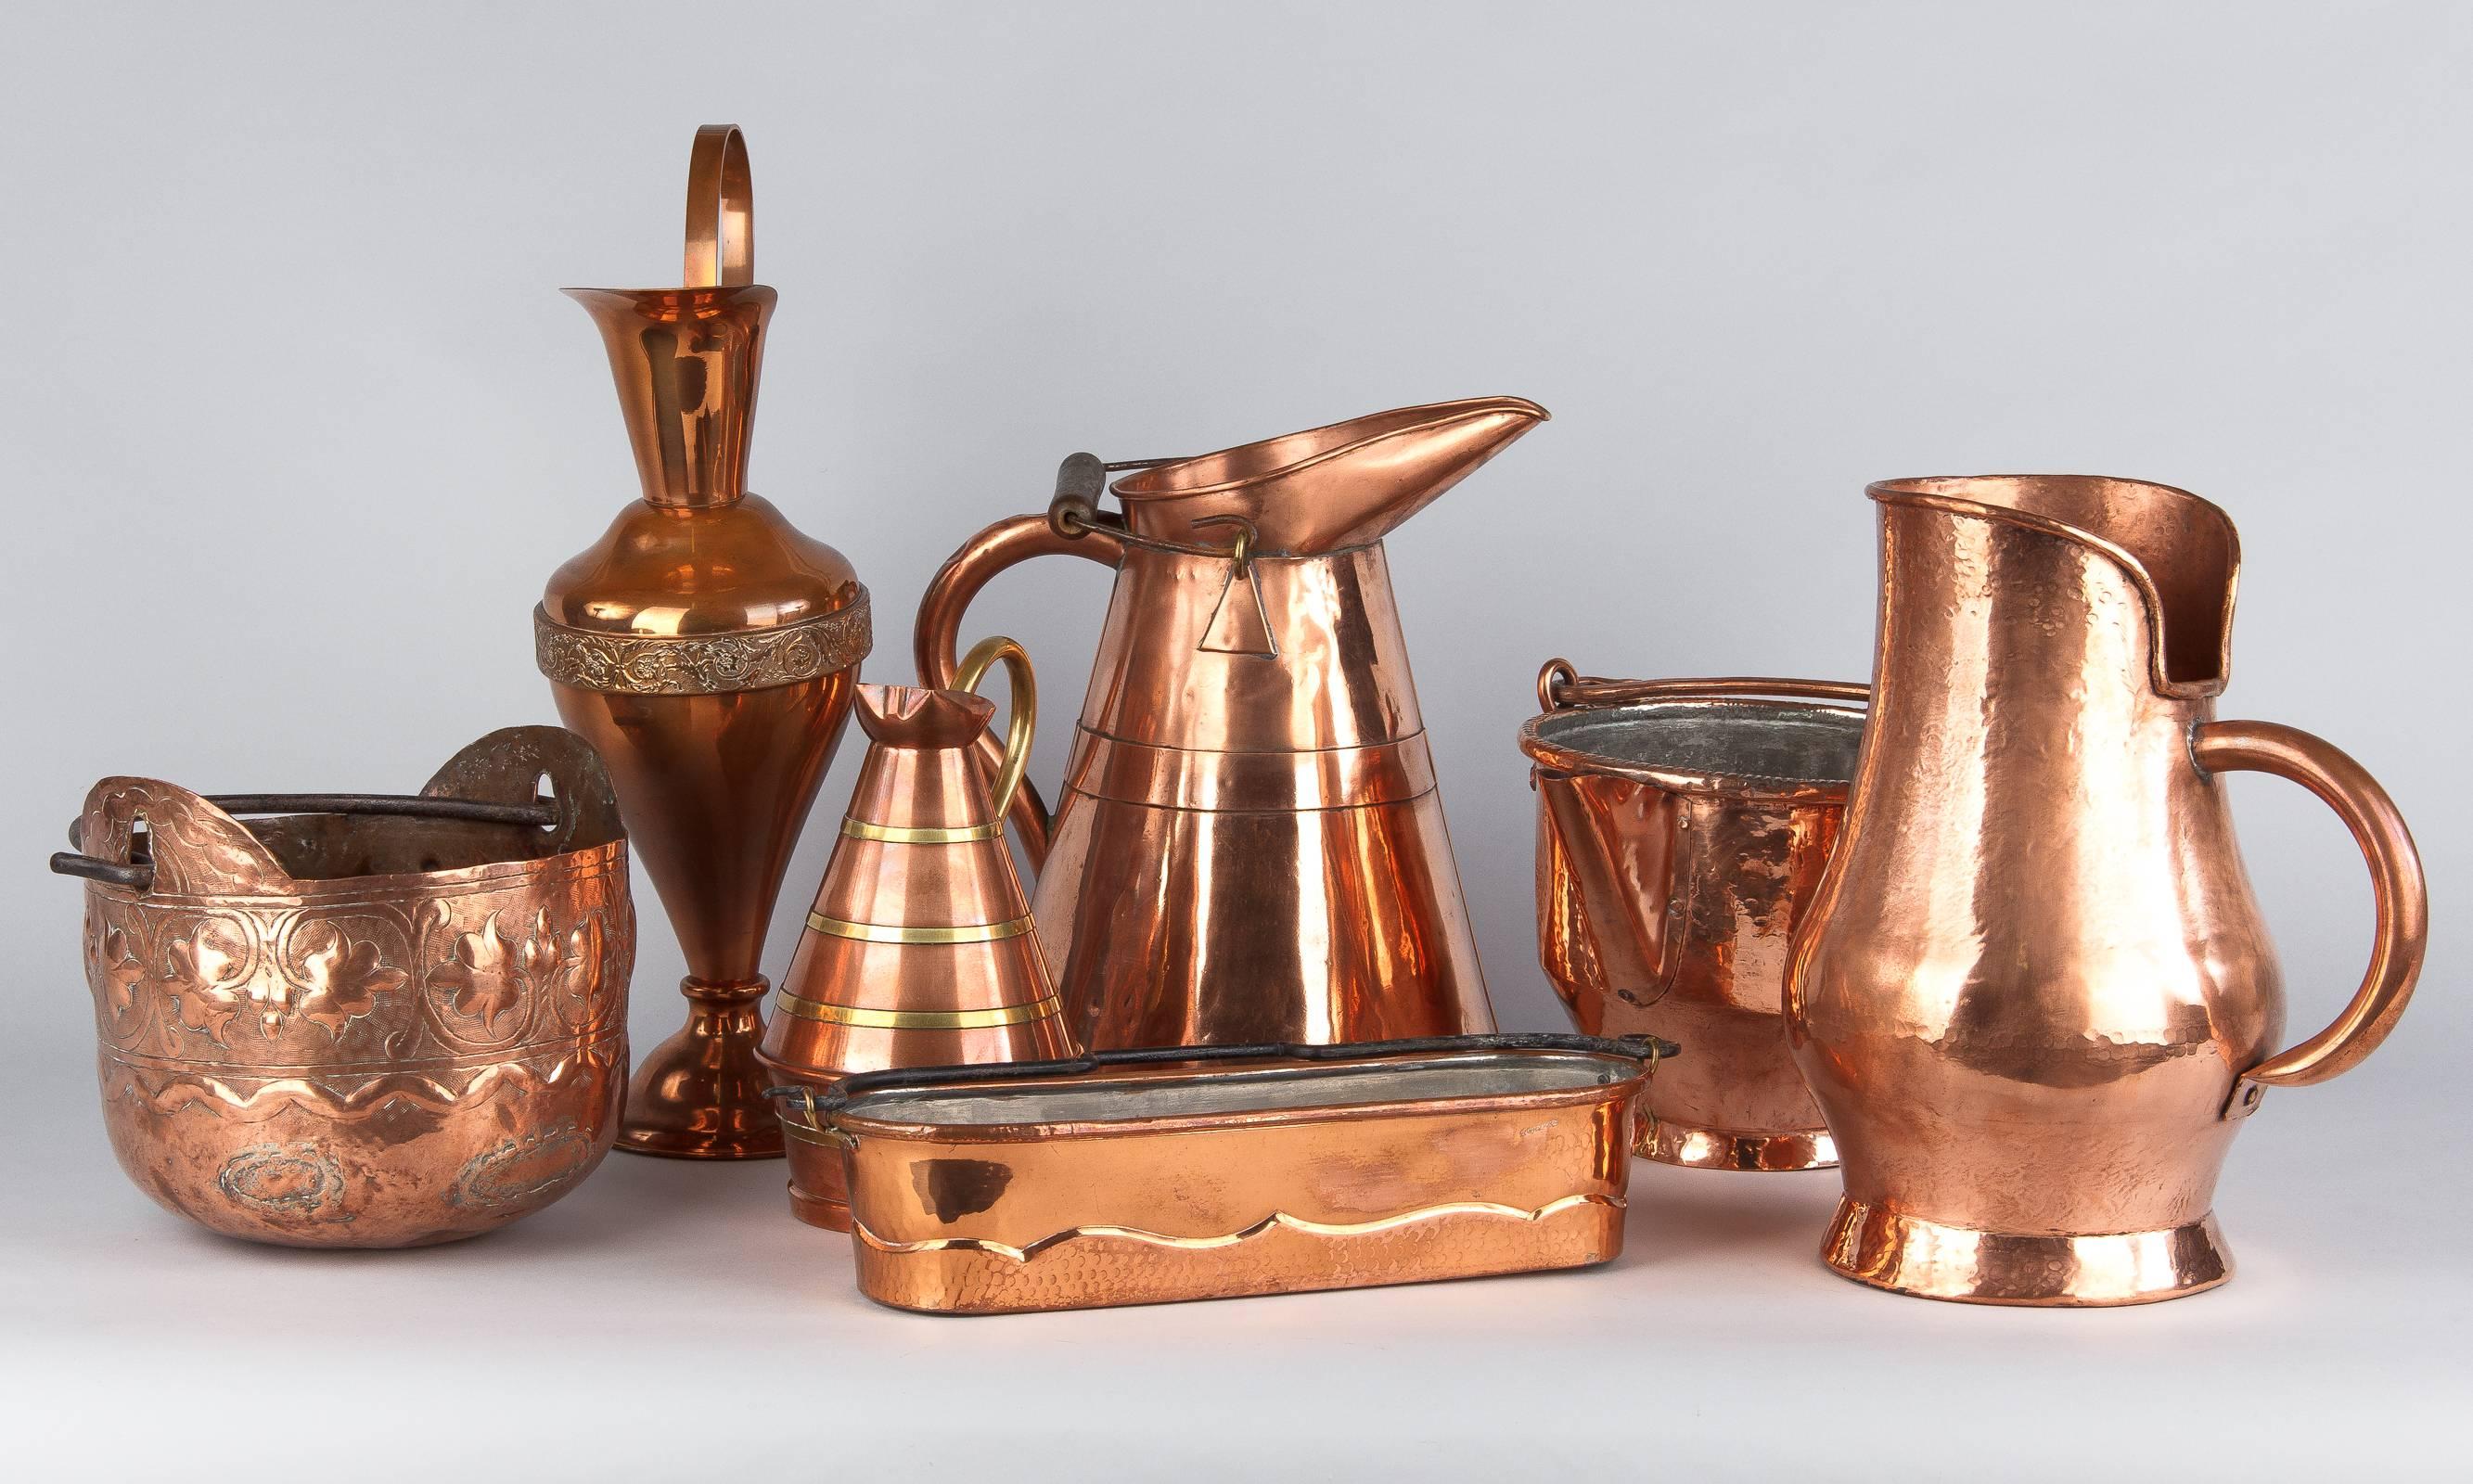 Vintage French copper and brass pitcher for wine and water, circa 1950. Two flared copper pieces are joined at their widest point, about one third of the way up the pitcher, creating a low belly. Four decorative bands of brass encircle the pot and a